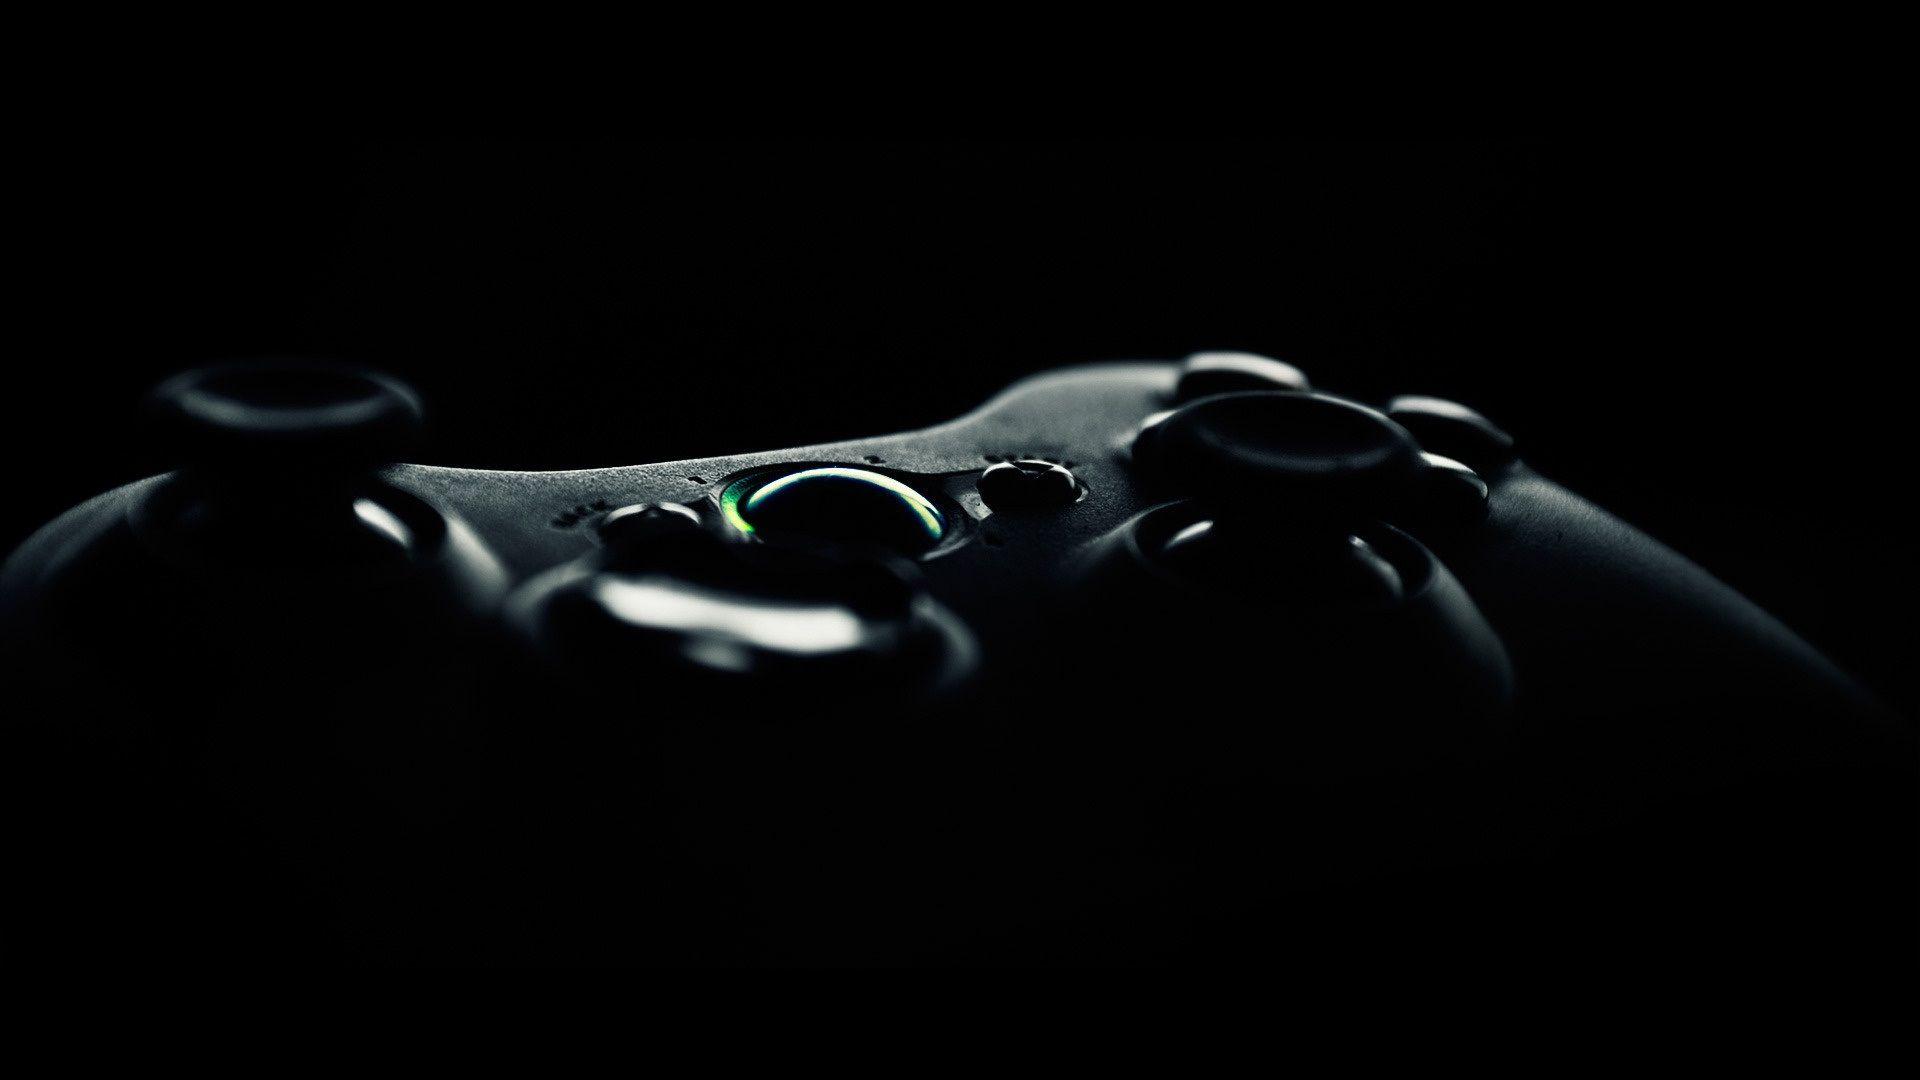 Video Game Controller Wallpapers Free Download > SubWallpapers